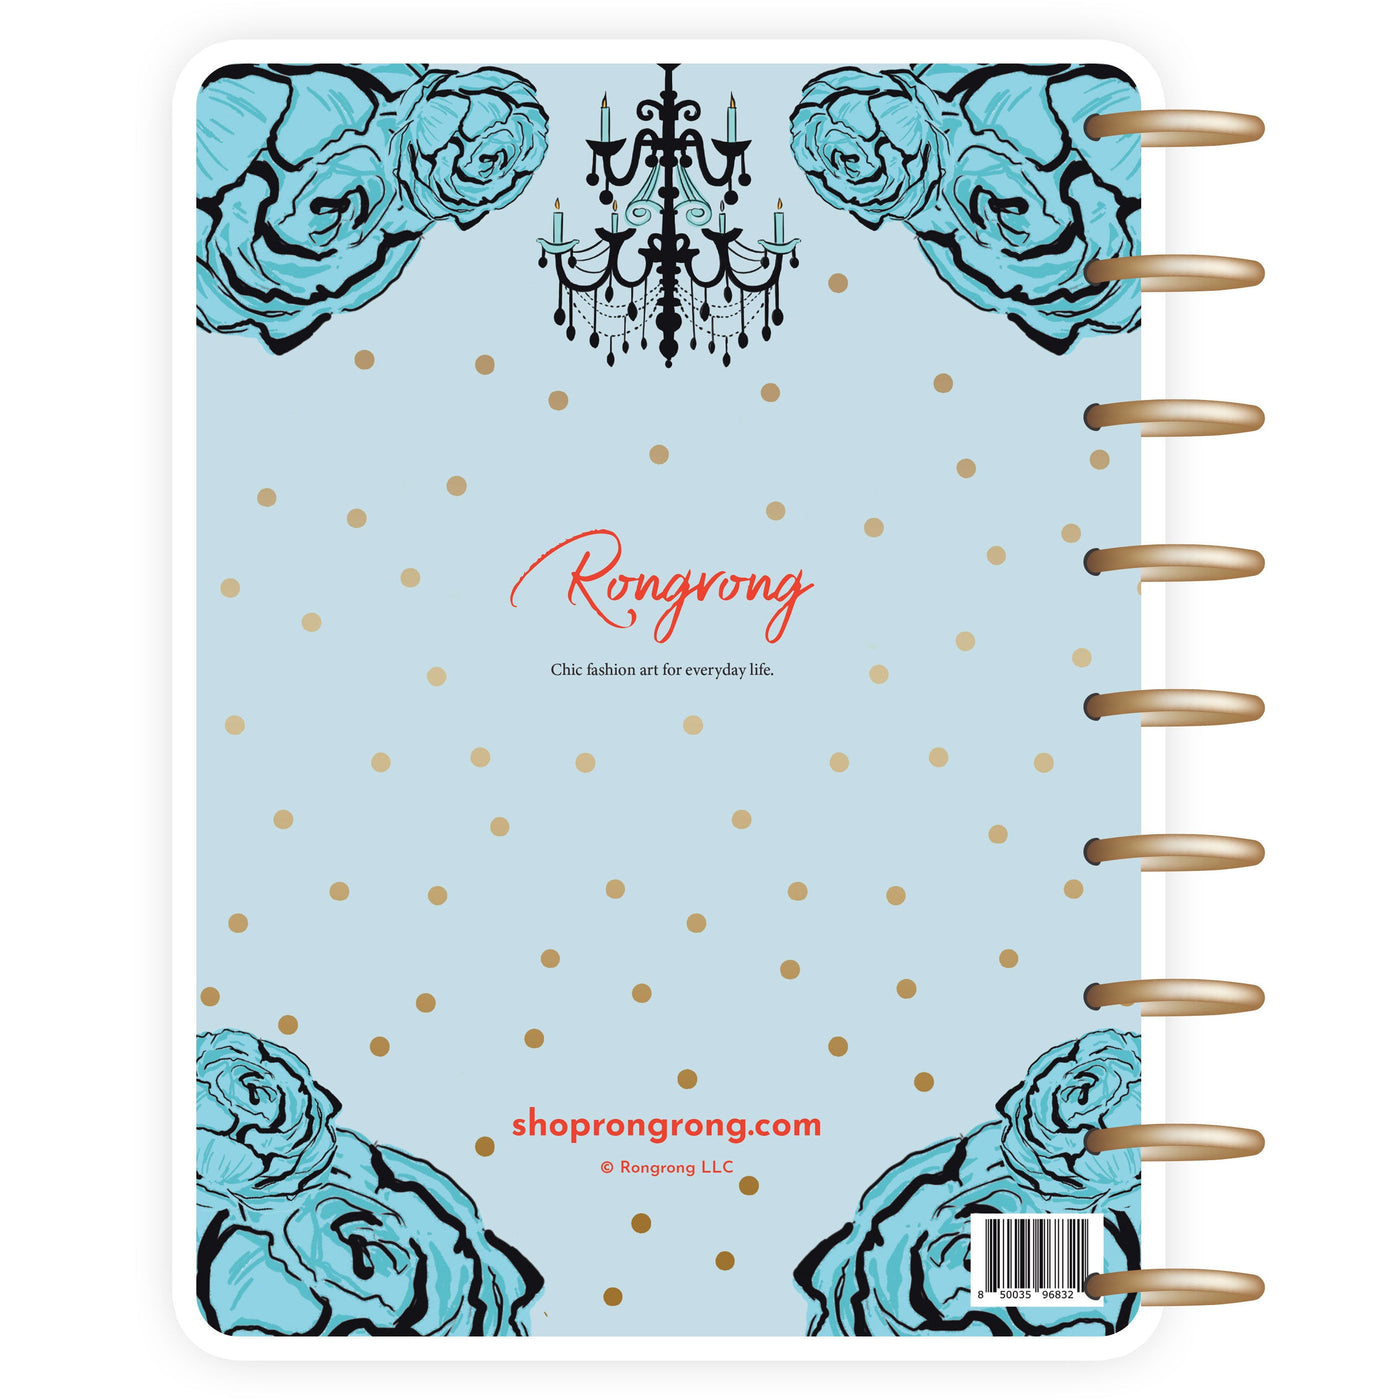 Breakfast at Tiffanys Planner Cover - Rongrong DeVoe - Shop Rongrong